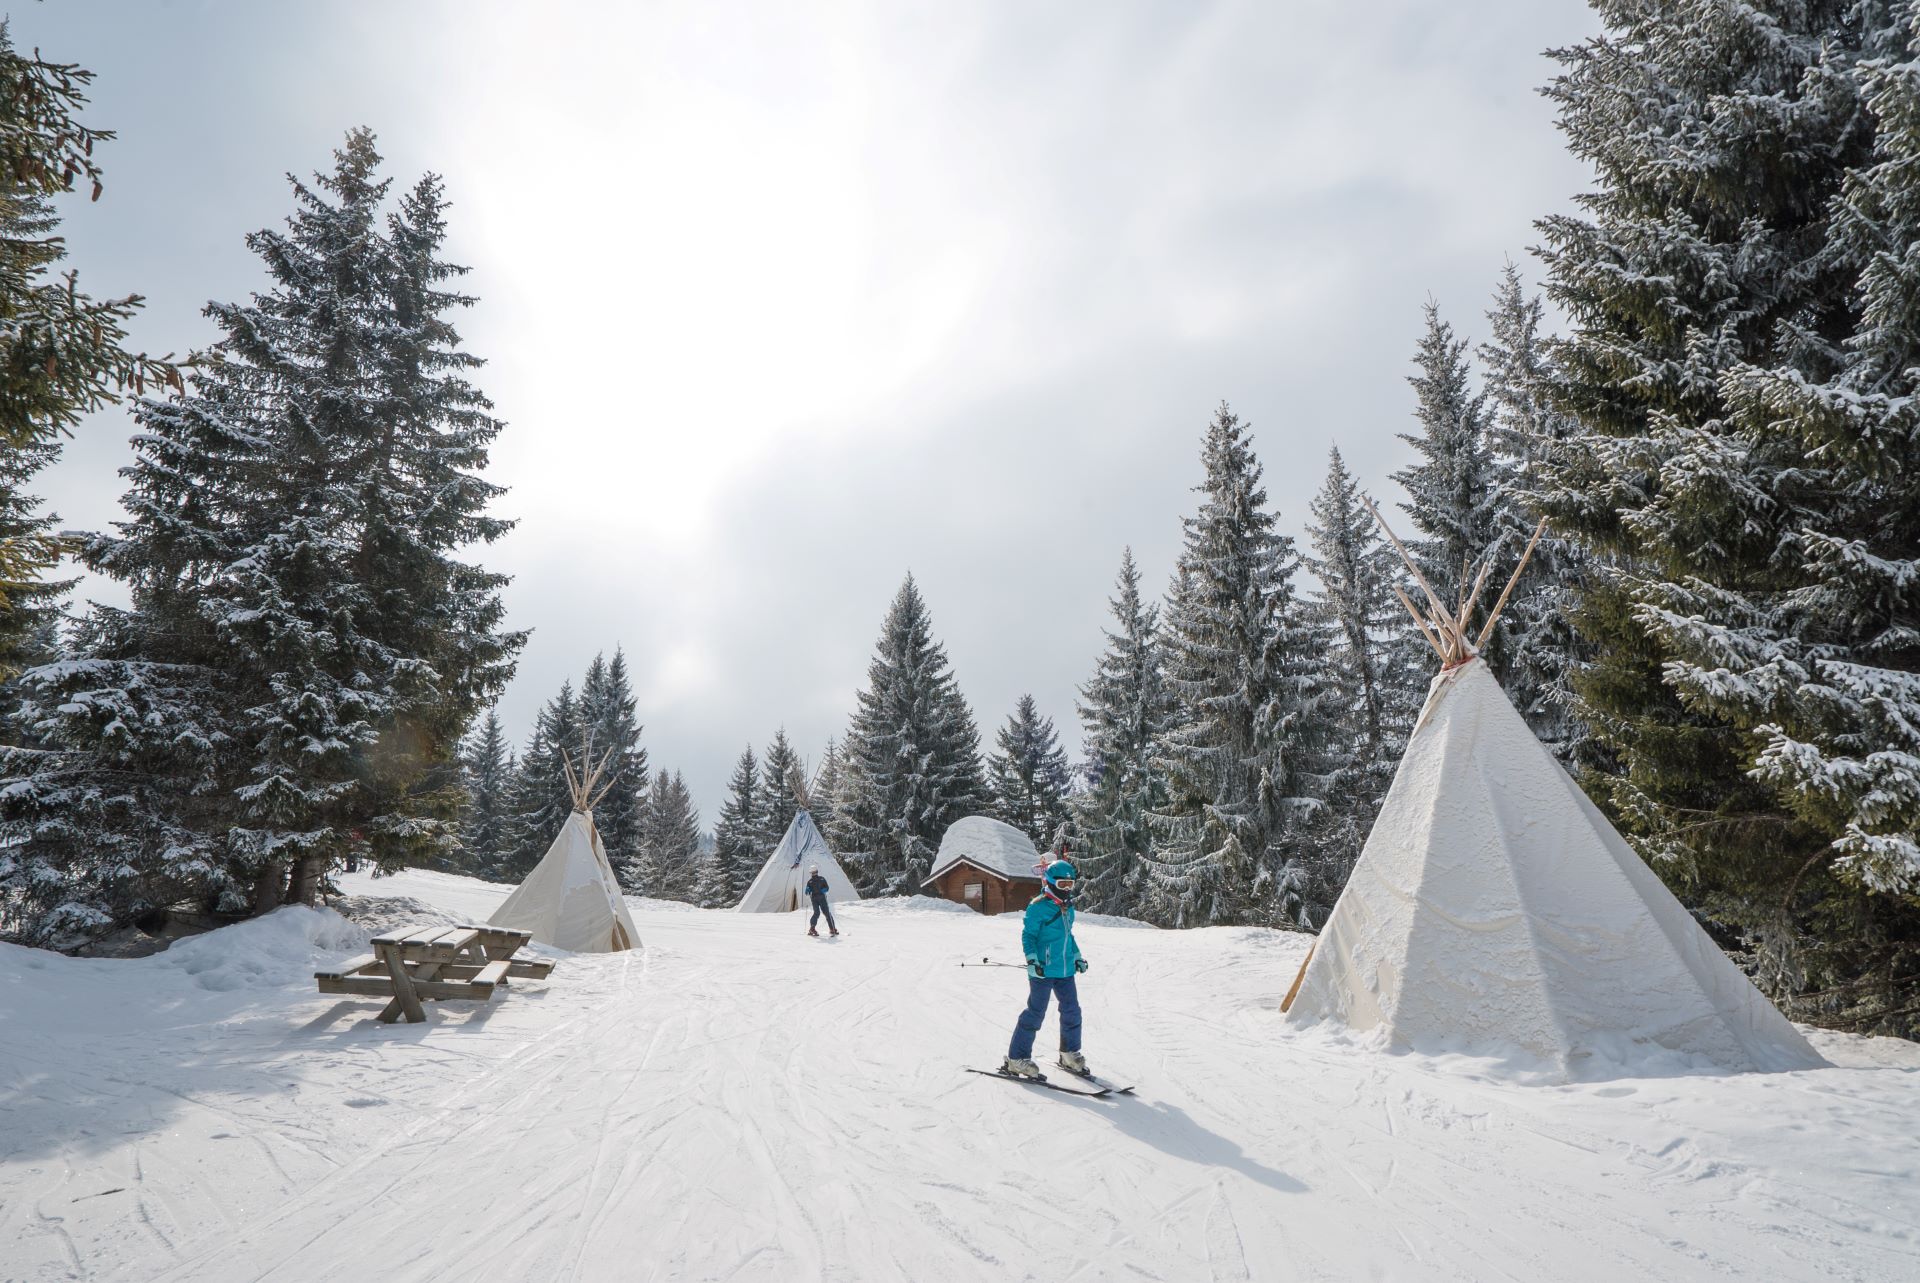 Kids fun zone with tipis in Les Gets (image: Valentin Ducrettet)